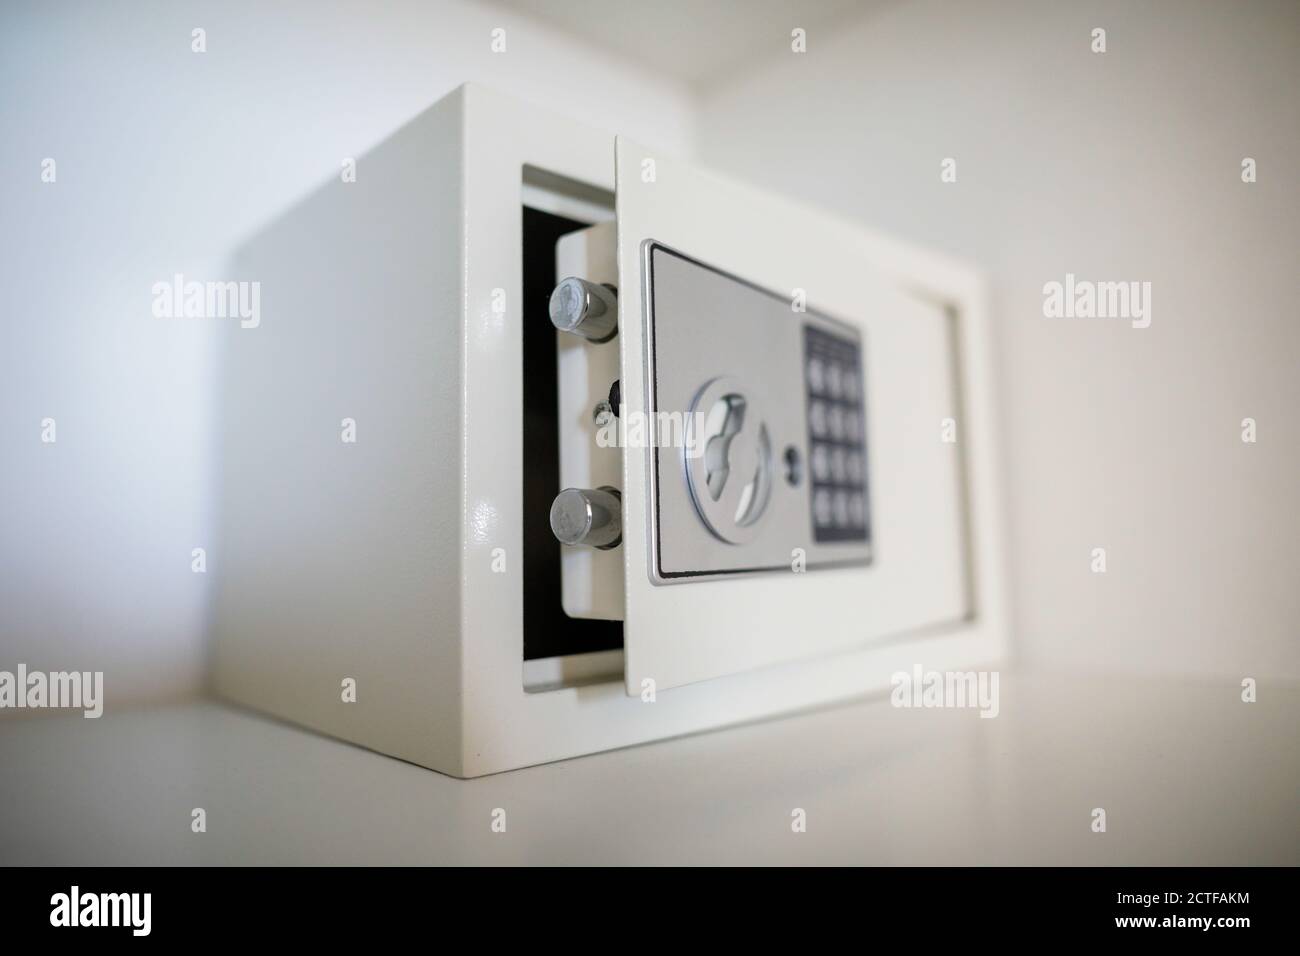 Metal safe inside an empty wooden closet in a hotel room Stock Photo